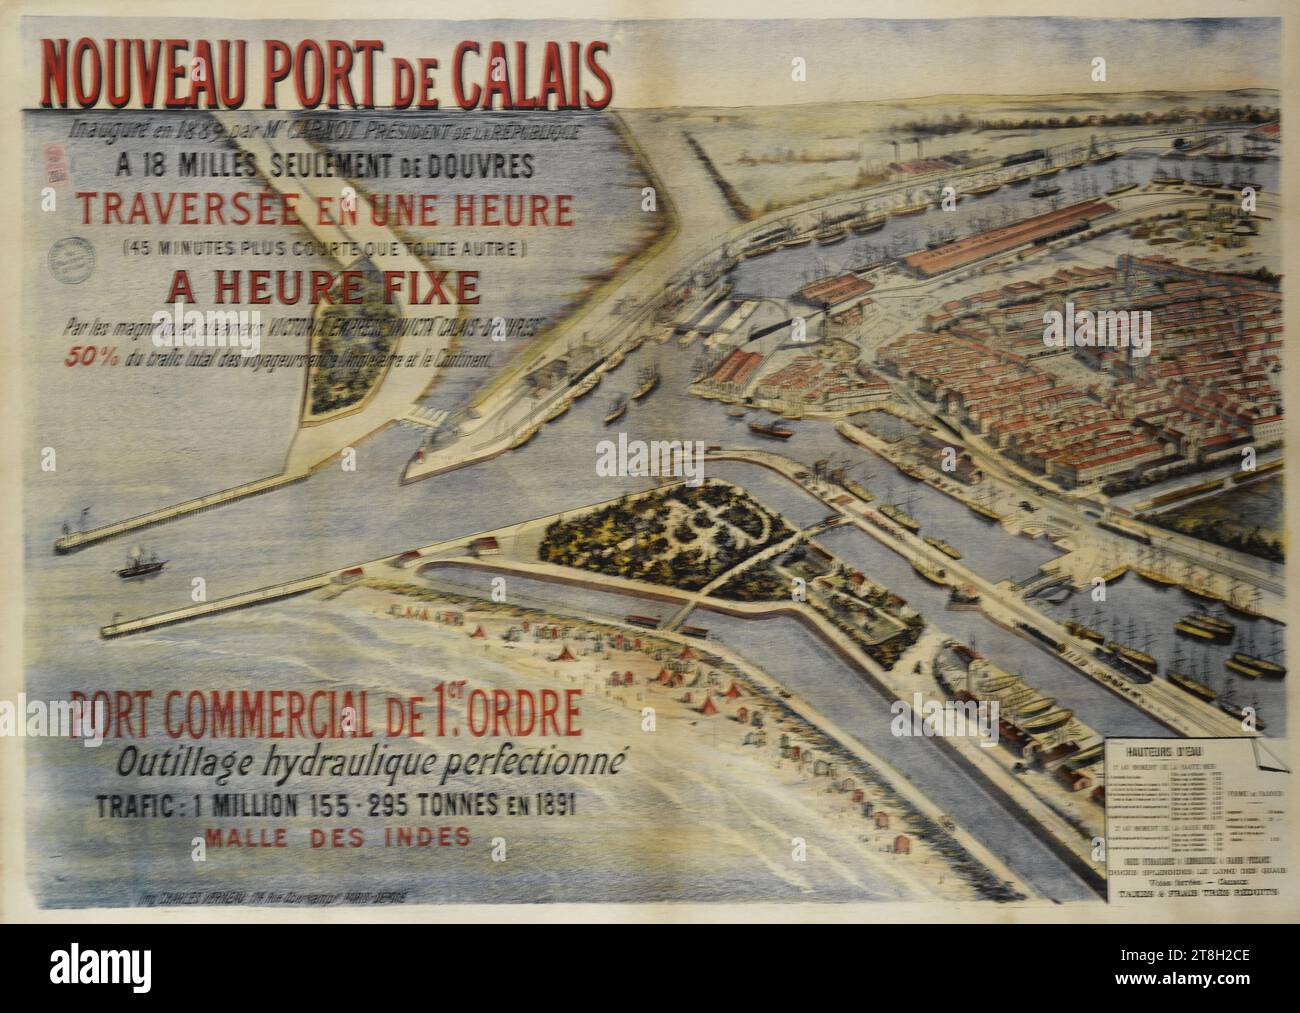 NOUVEAU PORT DE CALAIS, Inaugurated in 1889 by Mr CARNOT PRESIDENT OF THE REPUBLIC, AT ONLY 18 MILES FROM DOUVRES, CROSSING IN ONE HOUR, (45 MINUTES SHORTER THAN ANY OTHER), Imprimerie Charles Verneau, Imprimeur, Entre 1891 et 1900, Graphic arts, Poster, Dimensions - Work: Height: 100.2 cm, Width: 140.7 cm, Dimensions - Mounting:, Height: 106 cm, Width: 146.5 cm Stock Photo